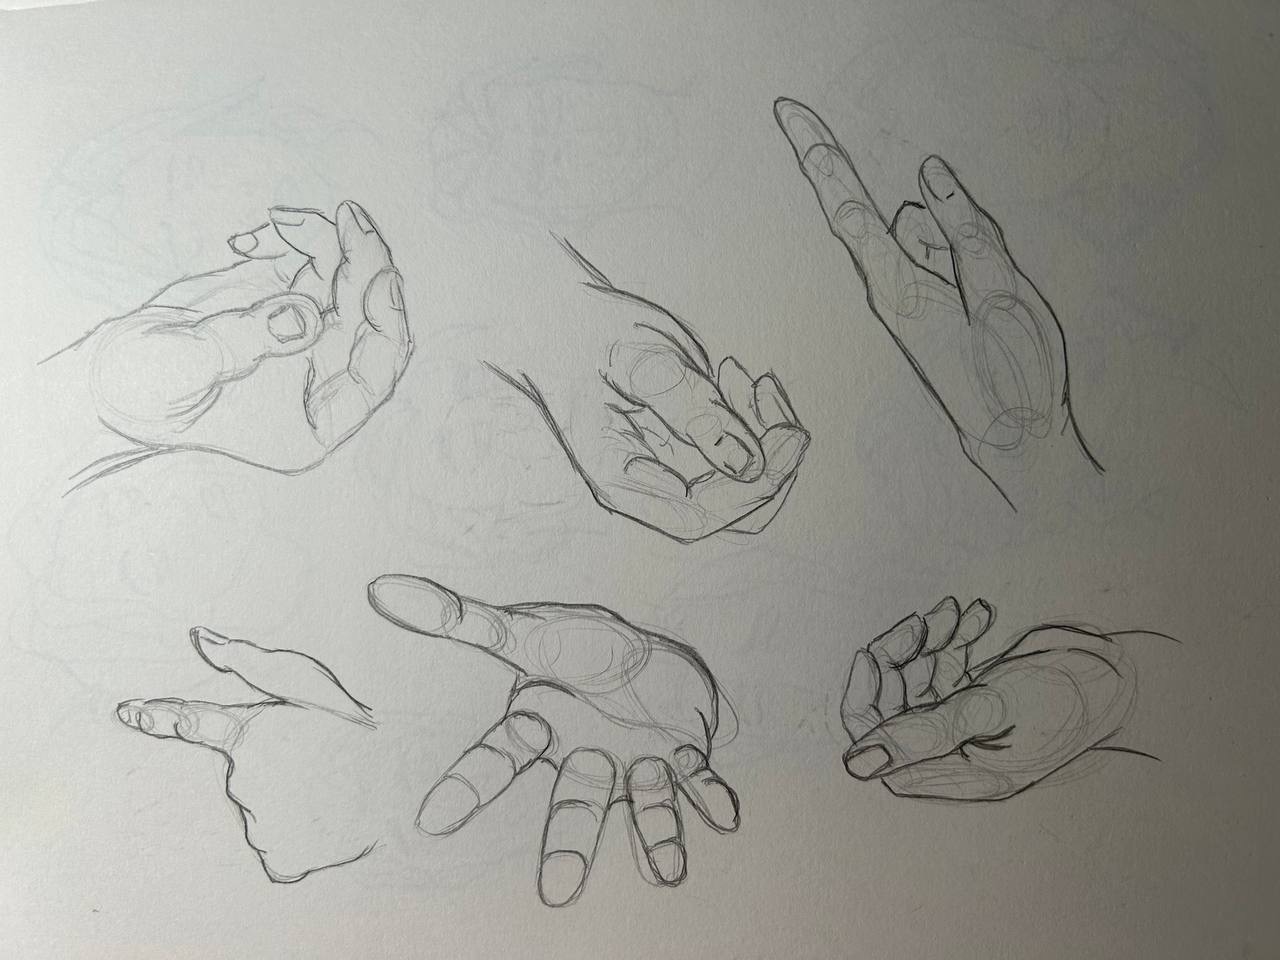 Two Hands Drawing Images - Free Download on Freepik